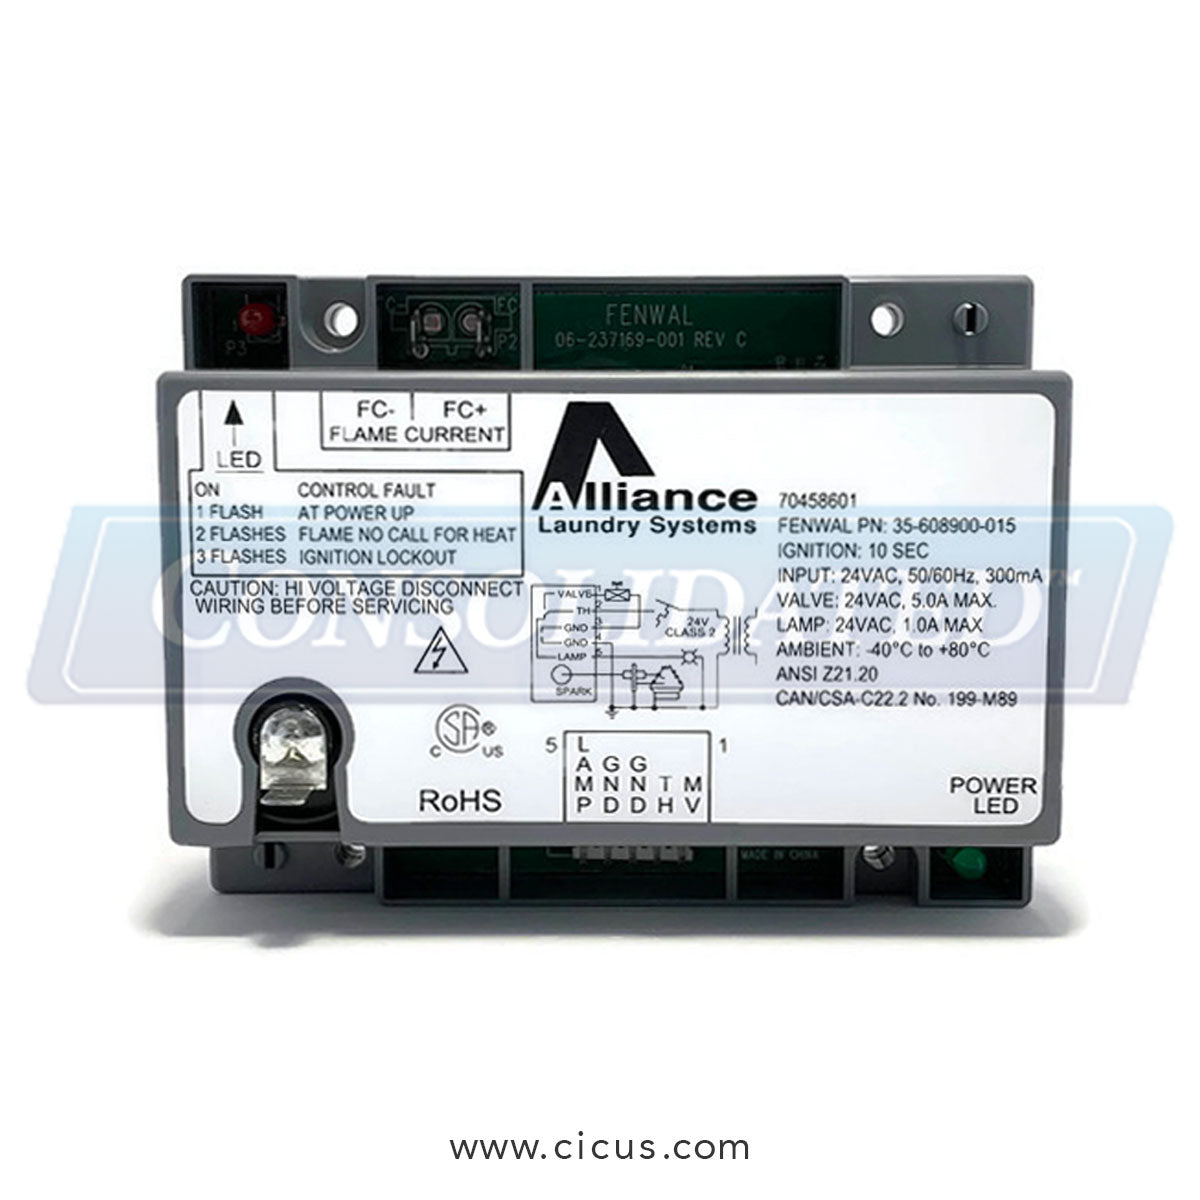 Alliance Laundry Systems Control - Ignition 24V Non-EU ROHS [70458601P]